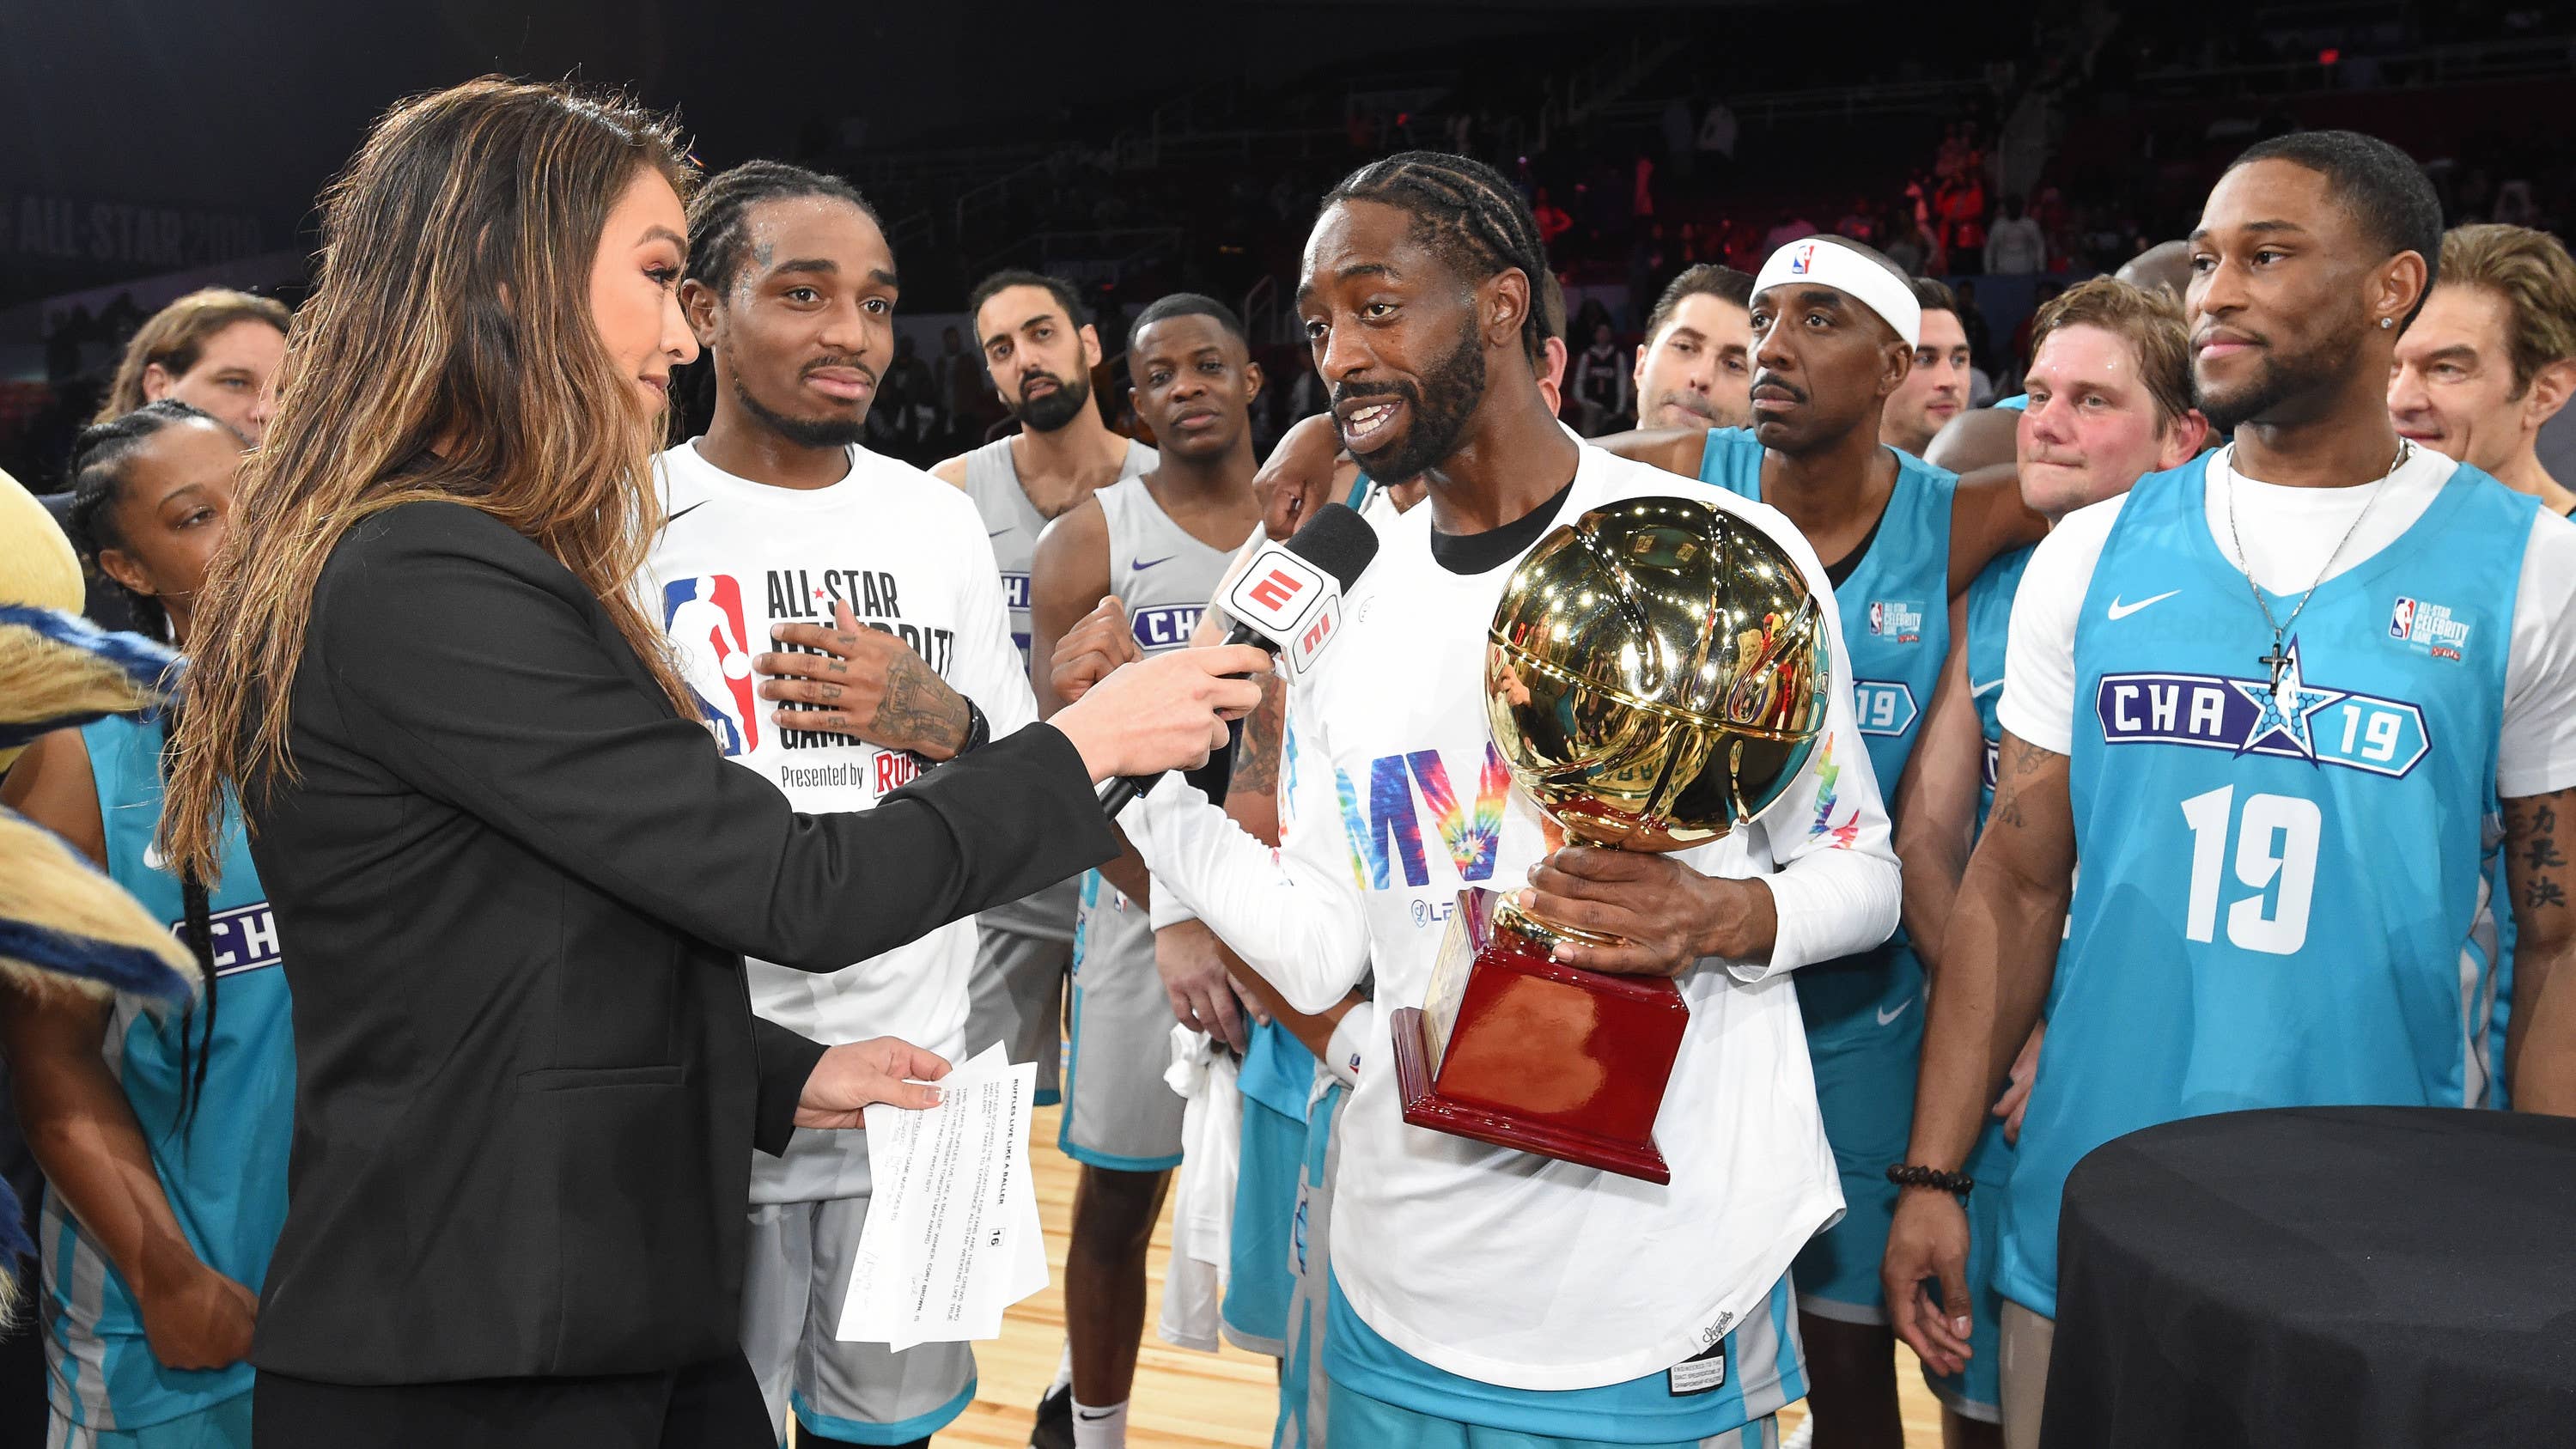 Every Sneaker Worn in the 2019 NBA All-Star Celebrity Game